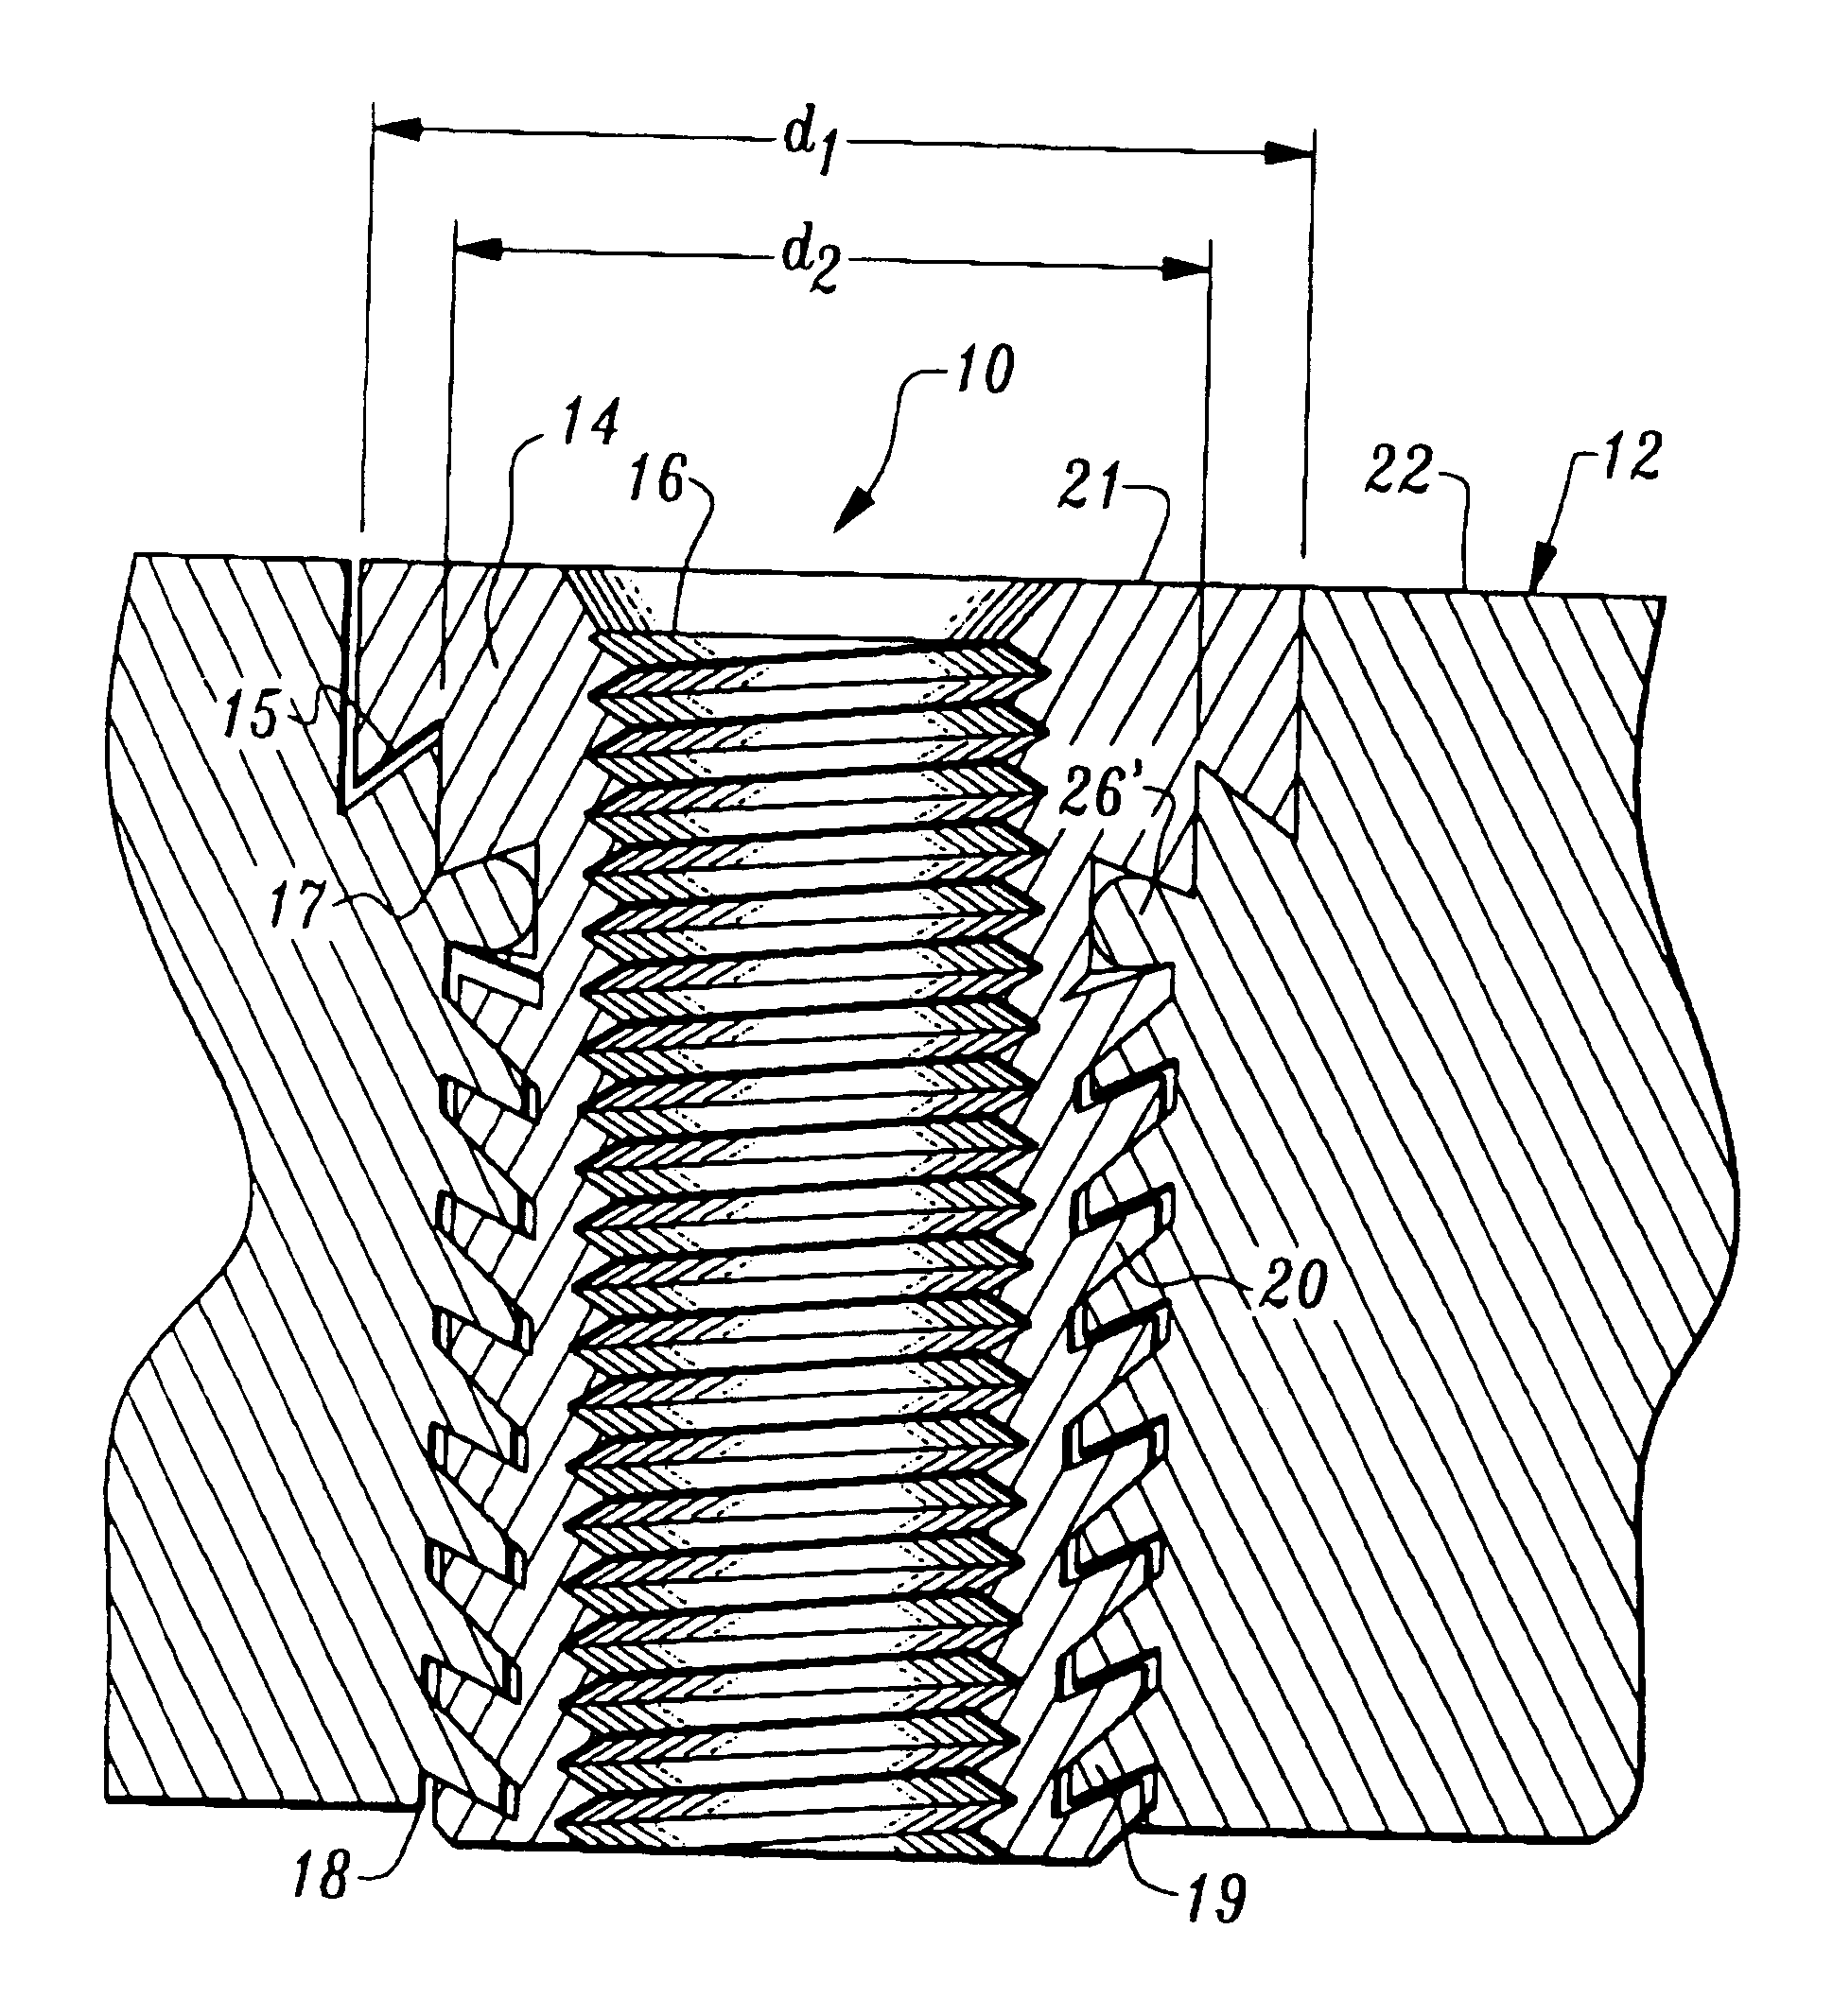 Thread replacement system and device